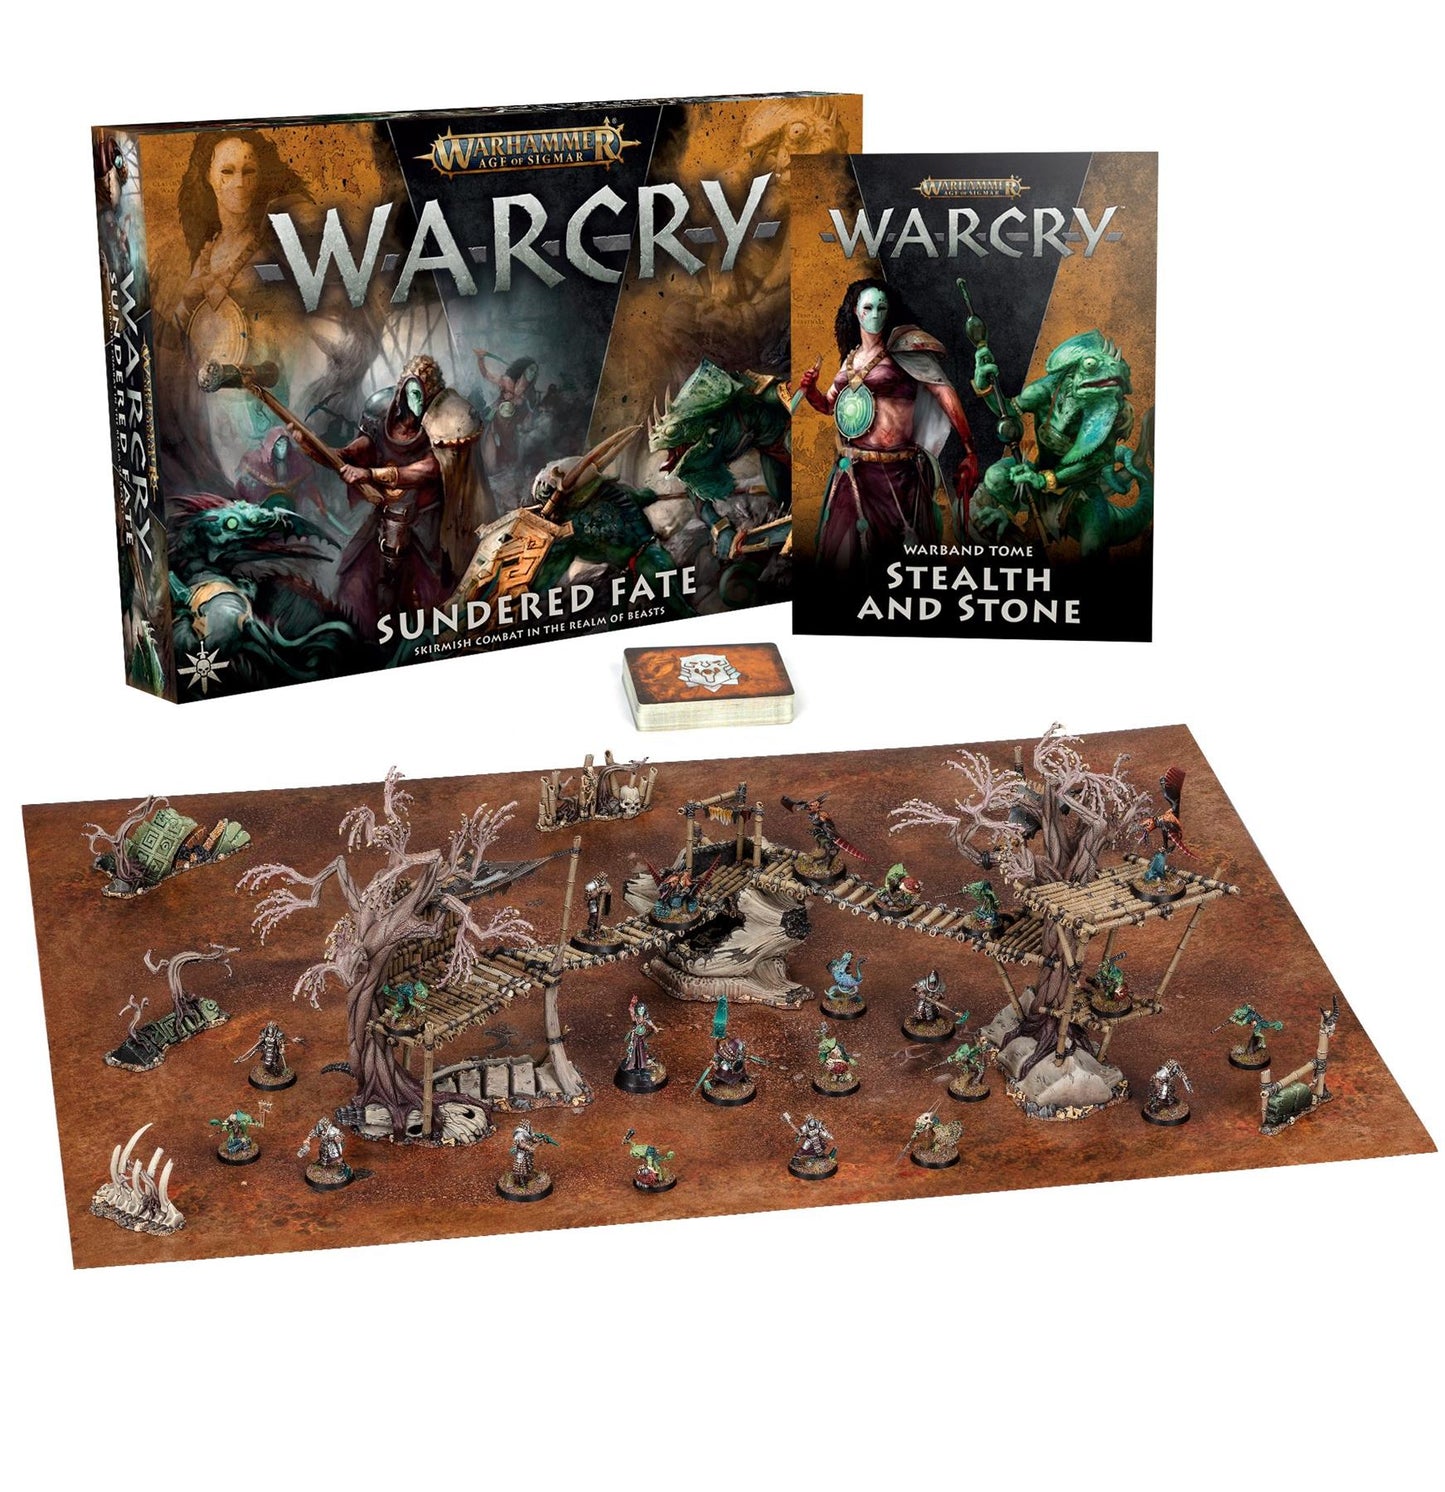 Sundered Fate - Warcry - Warhammer Age of Sigmar